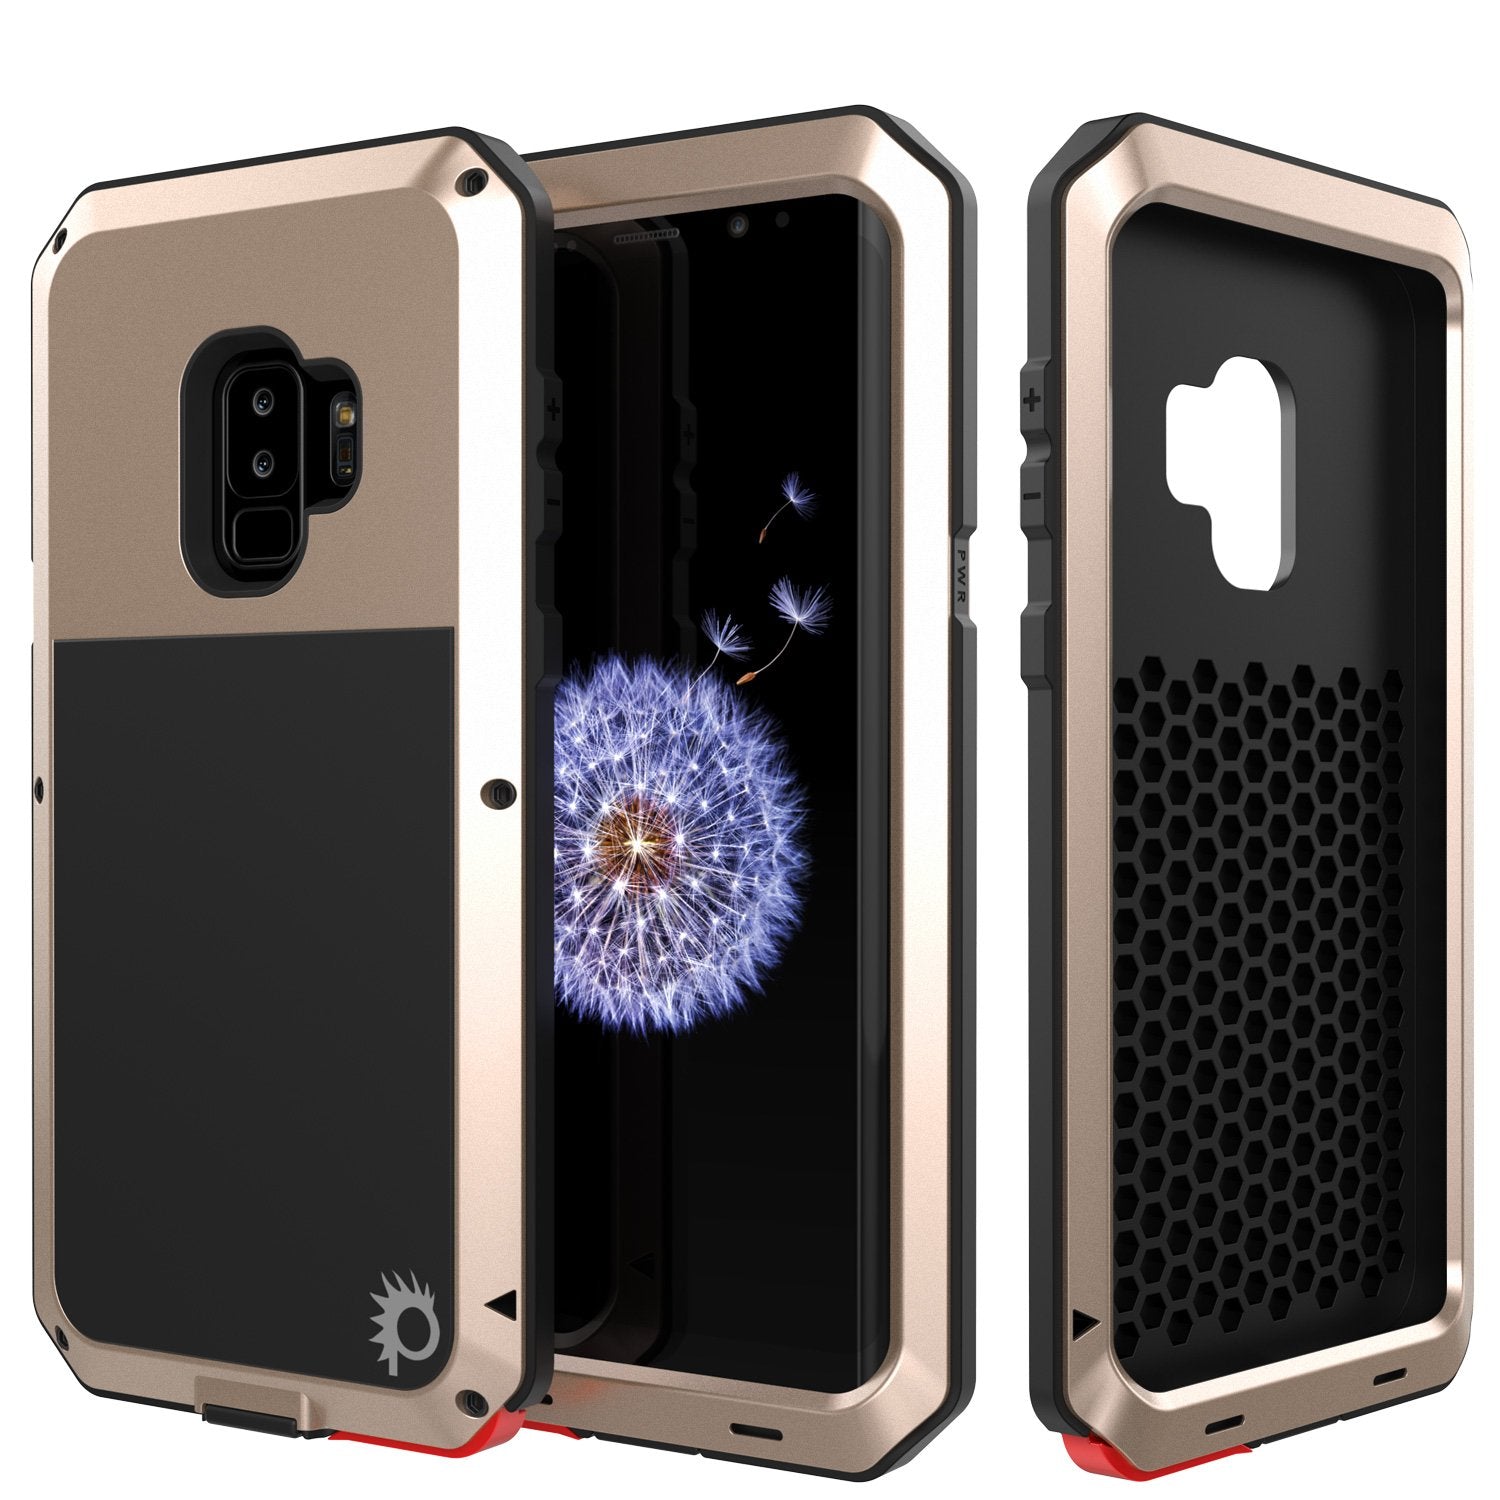 Galaxy S9 Plus Metal Case, Heavy Duty Military Grade Rugged Armor Cover [shock proof] Hybrid Full Body Hard Aluminum & TPU Design [non slip] W/ Prime Drop Protection for Samsung Galaxy S9 Plus [Gold]